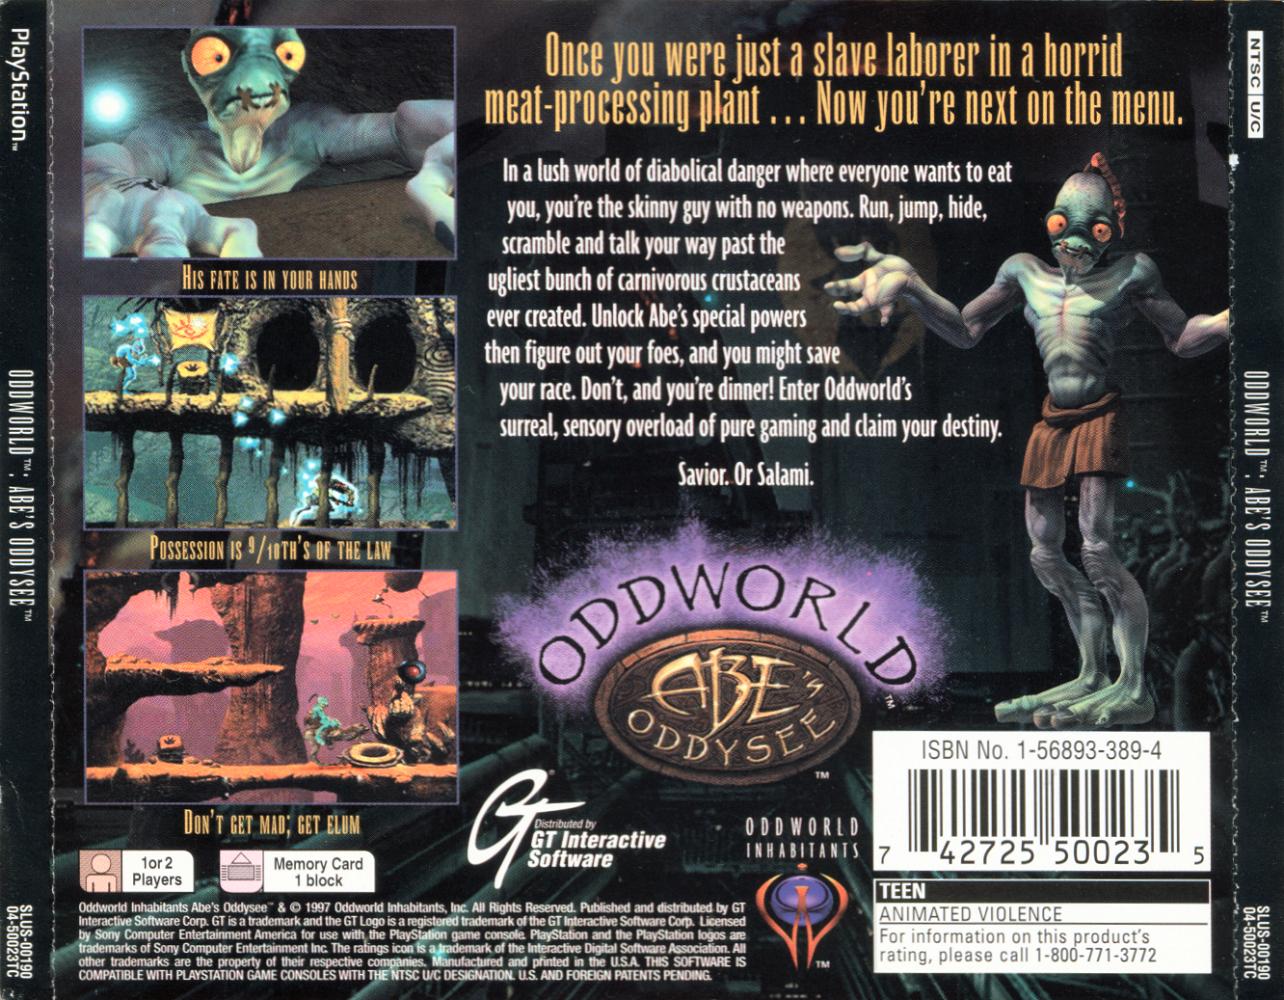 Oddworld: Abe's Oddysee Details - LaunchBox Games Database